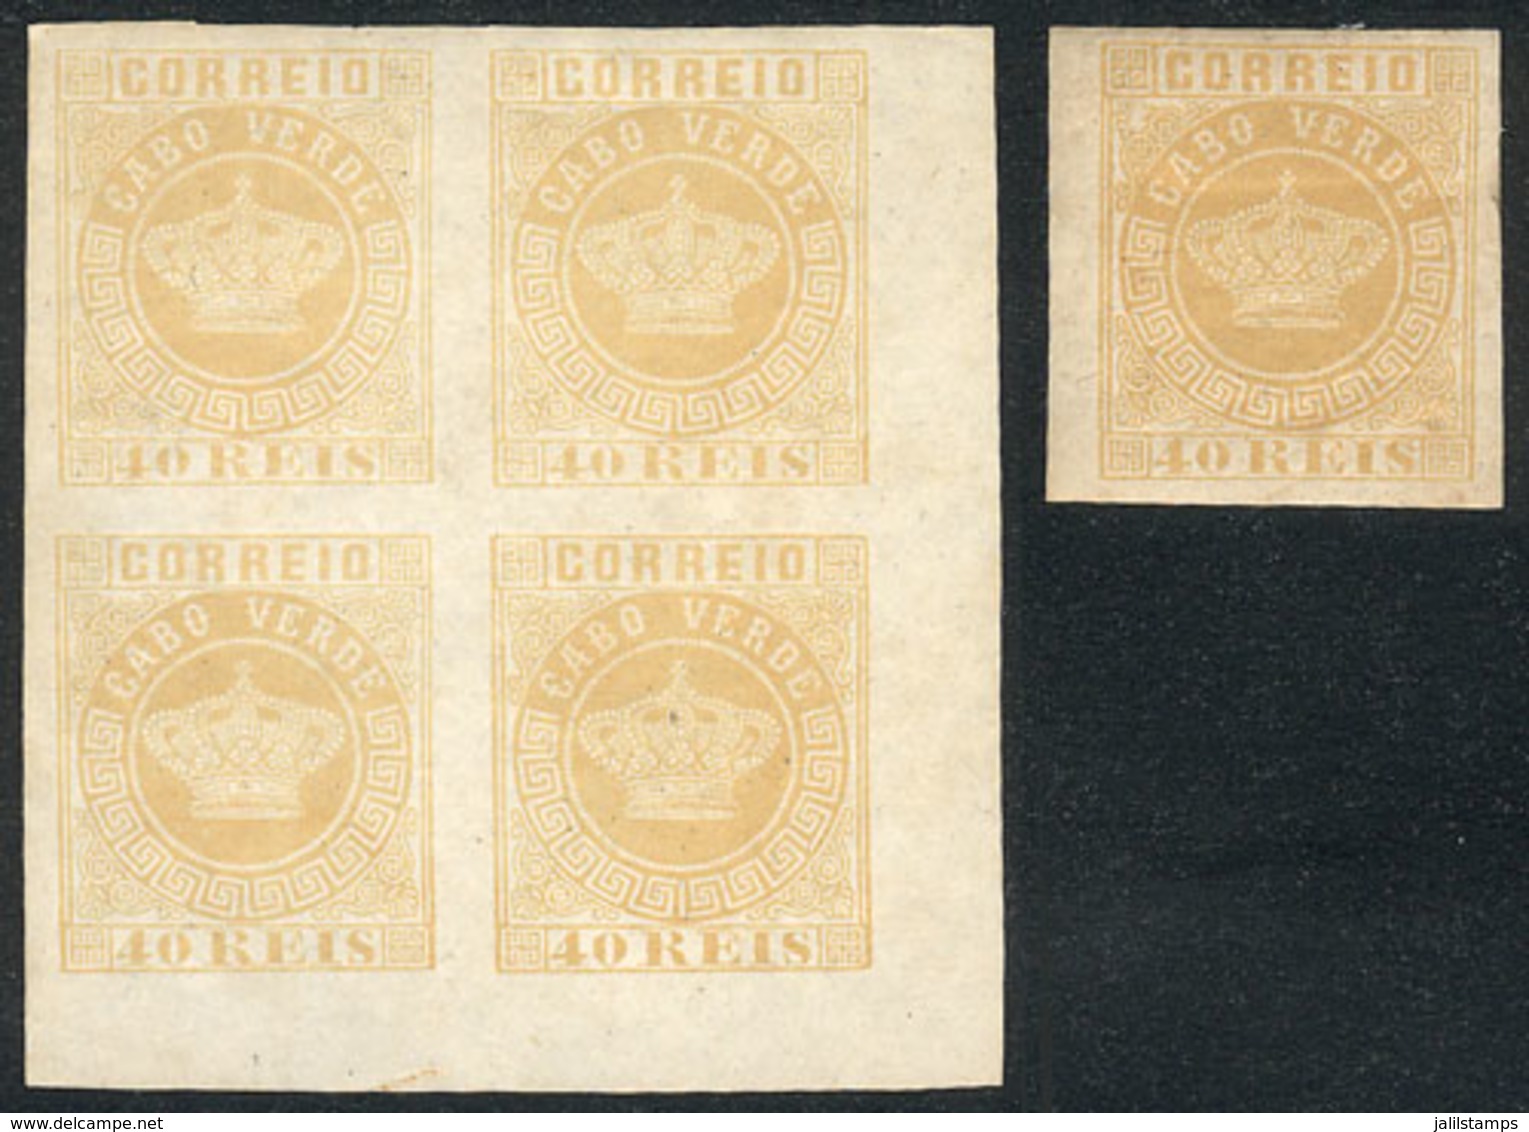 CAPE VERDE: Sc.13a, 1881/5 40Rs. Yellow IMPERFORATE, Single With Original Gum + Corner Block Of 4 Without Gum. - Kap Verde